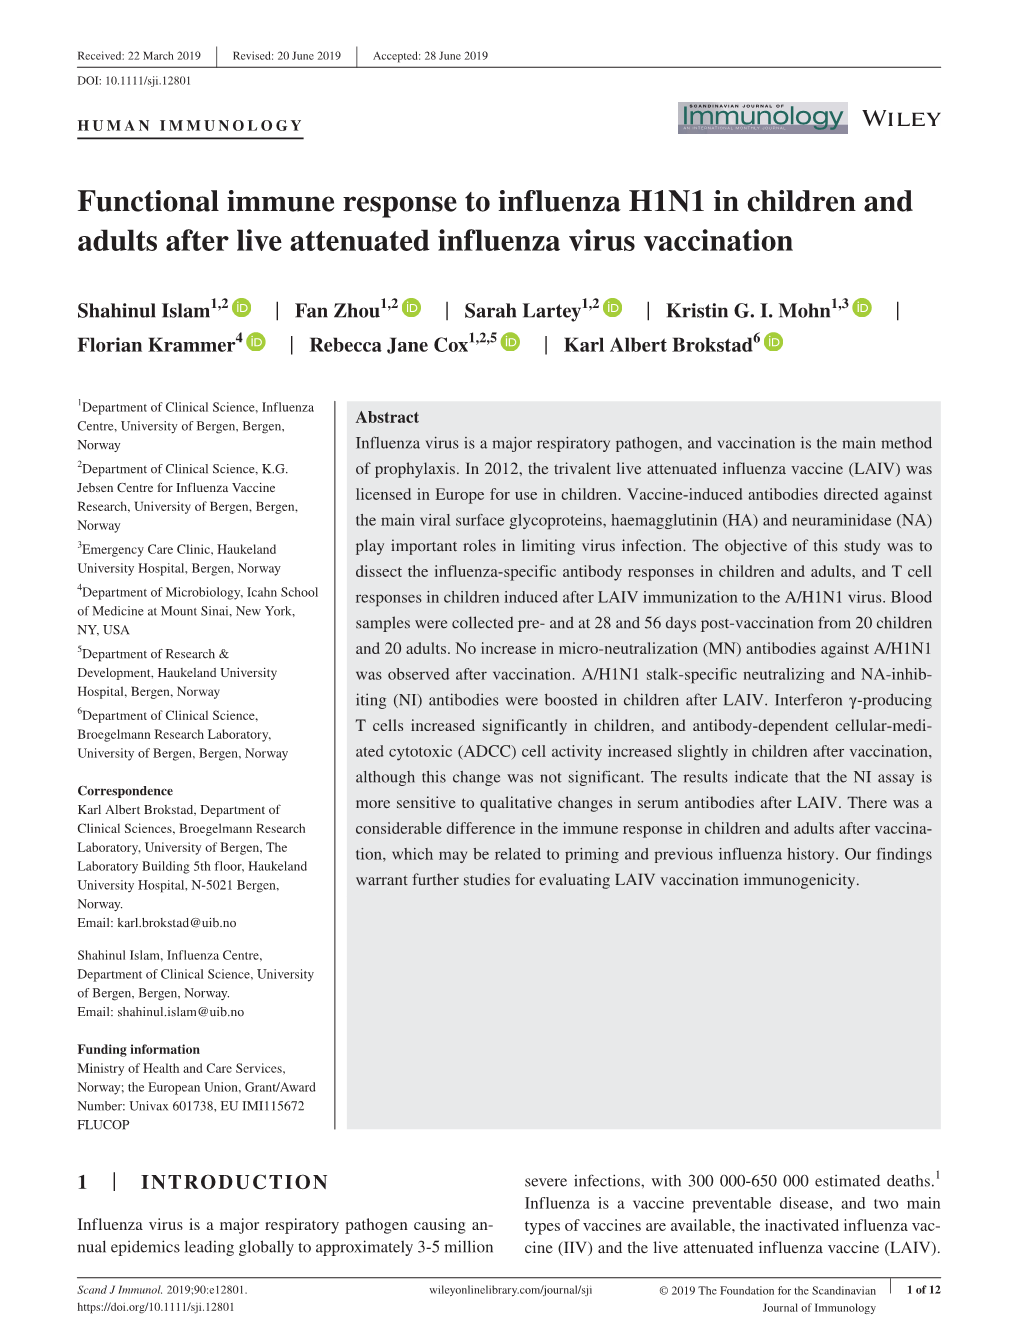 Functional Immune Response to Influenza H1N1 in Children and Adults After Live Attenuated Influenza Virus Vaccination